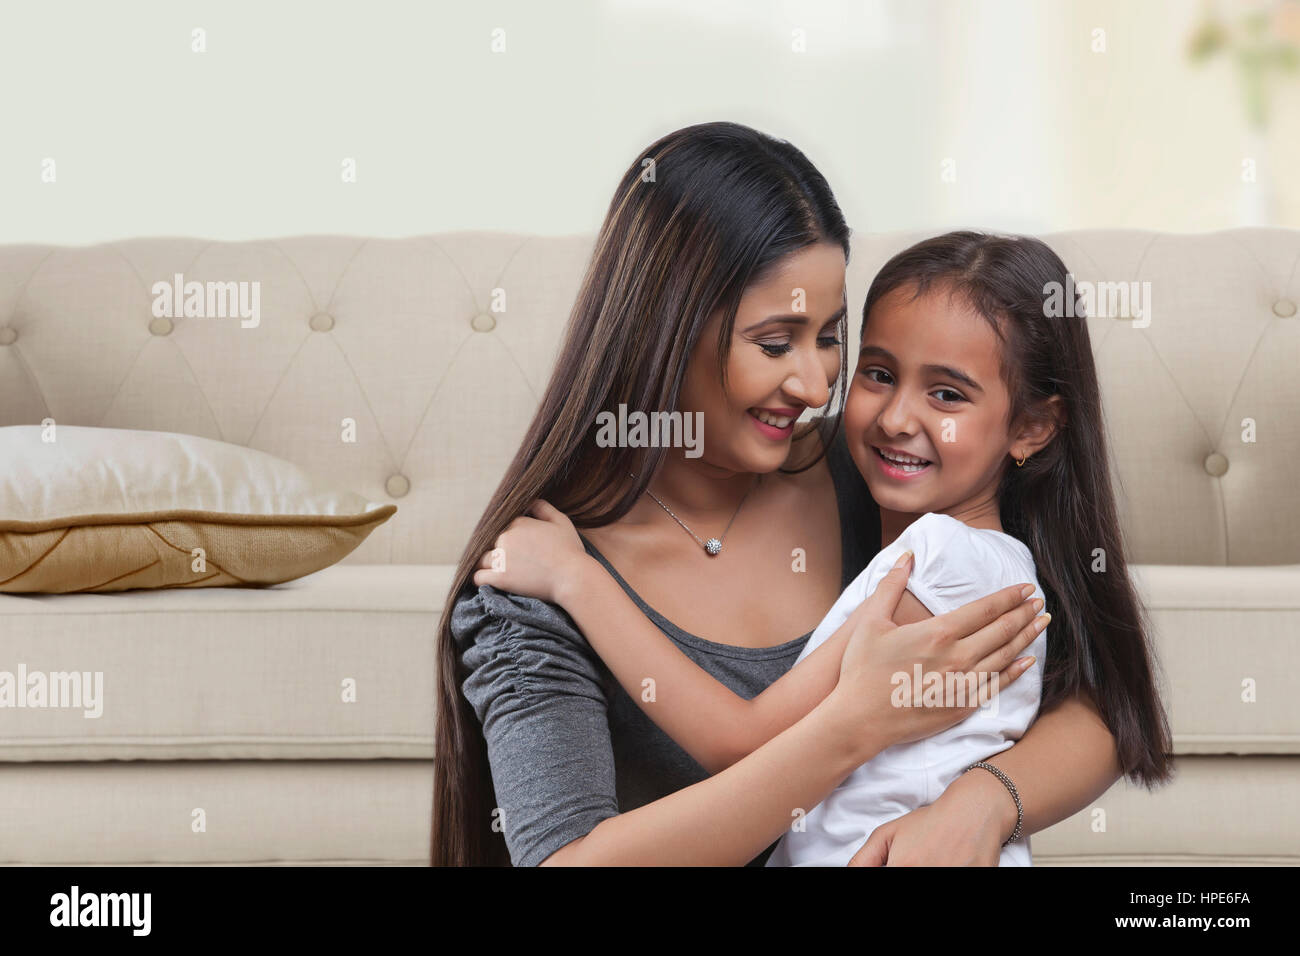 Smiling mother and daughter hugging Banque D'Images